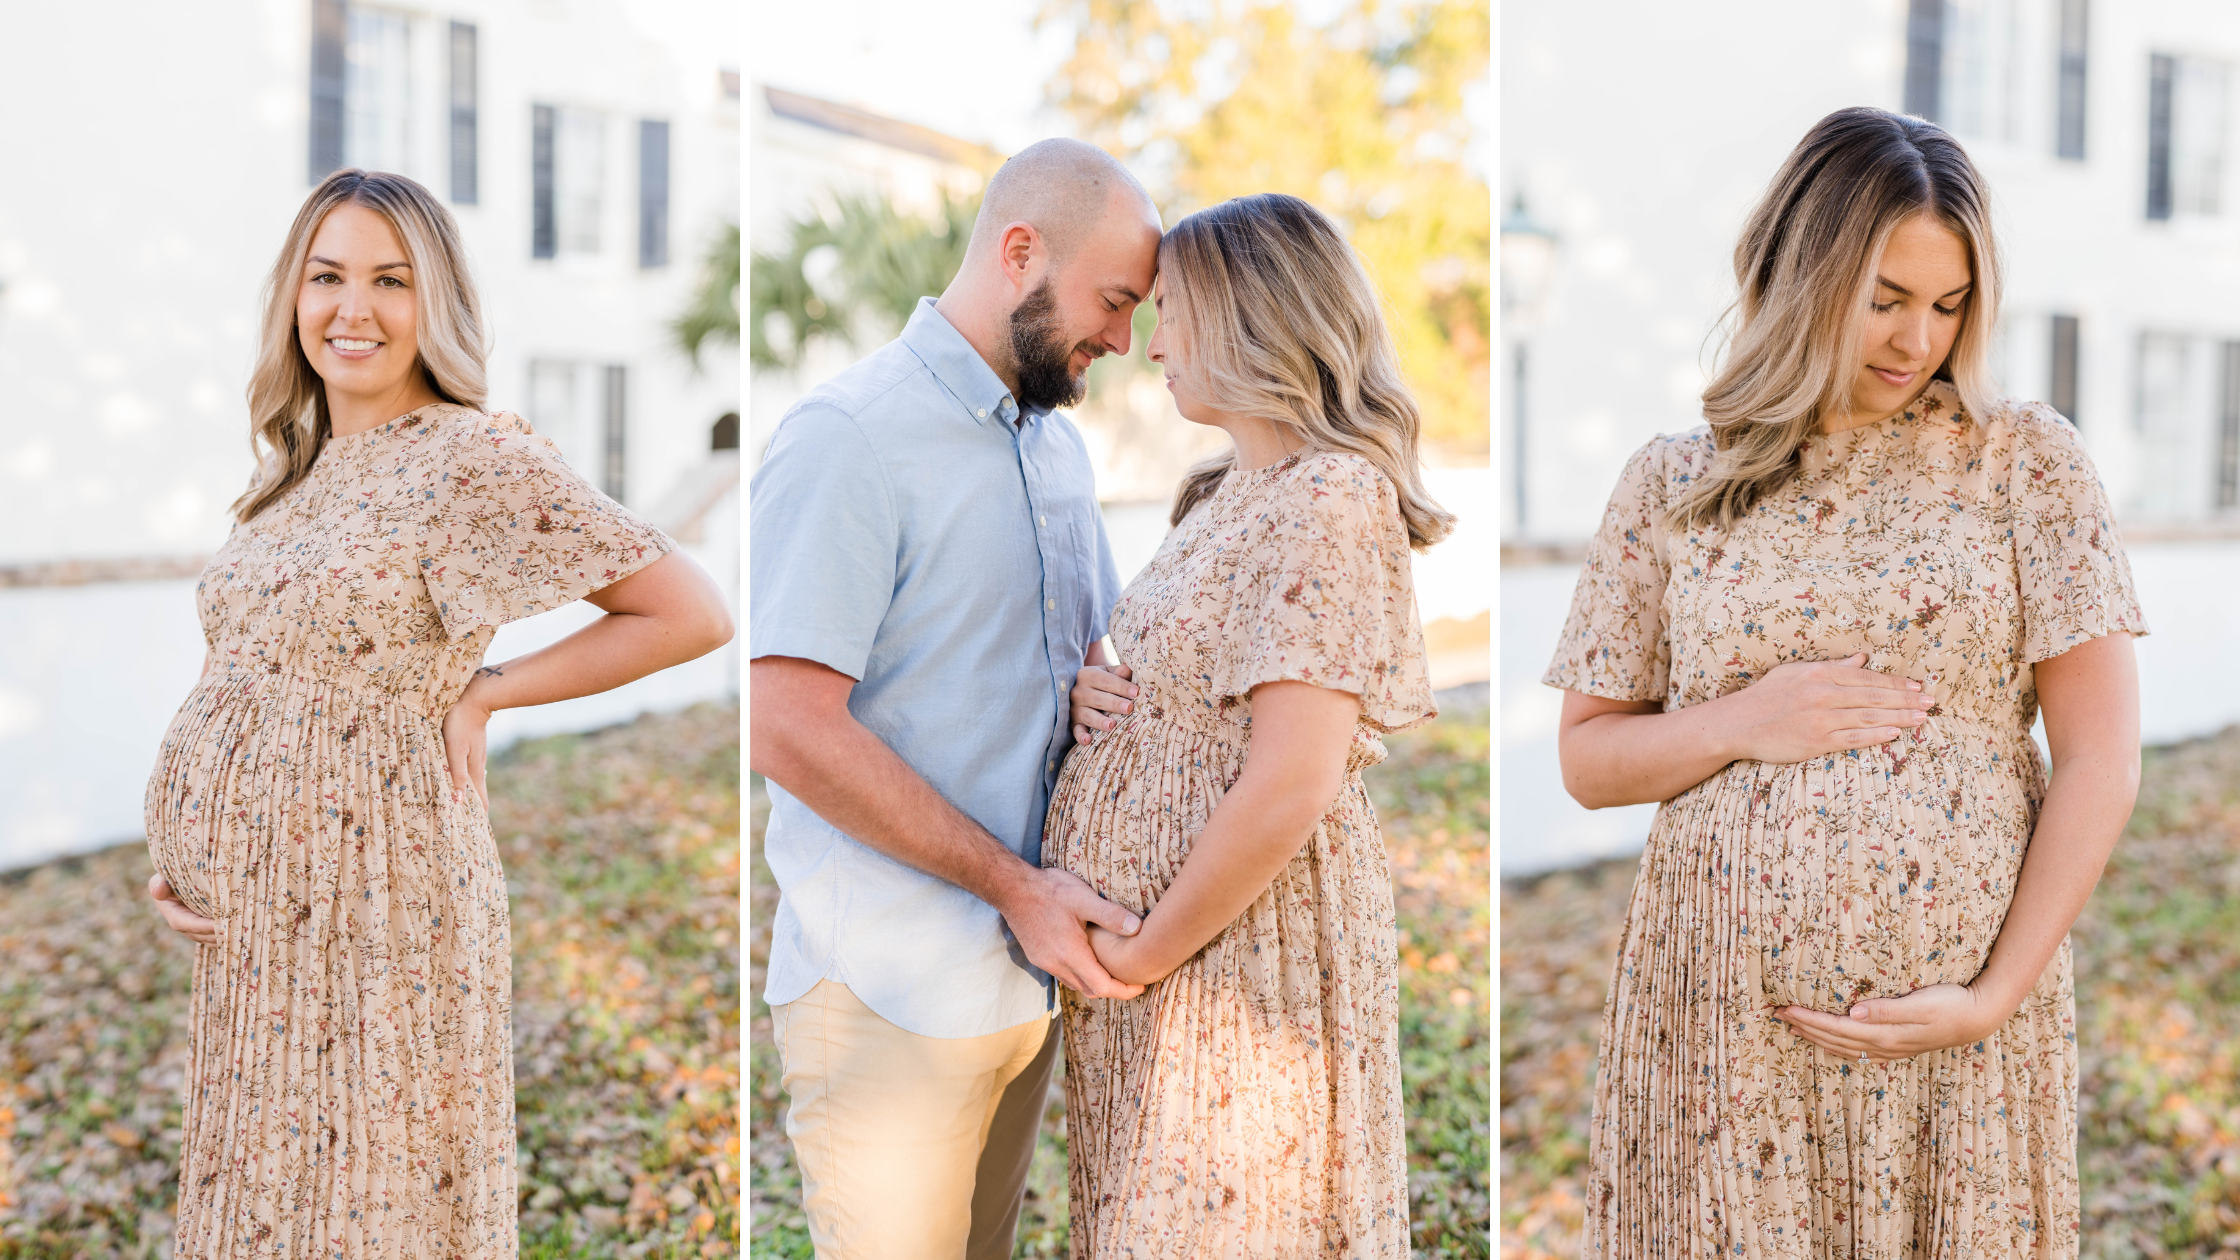 Downtown Mobile Alabama (Fort Conde / History Museum) Maternity Session Photoshoot Photographed by Kristen Marcus Photography